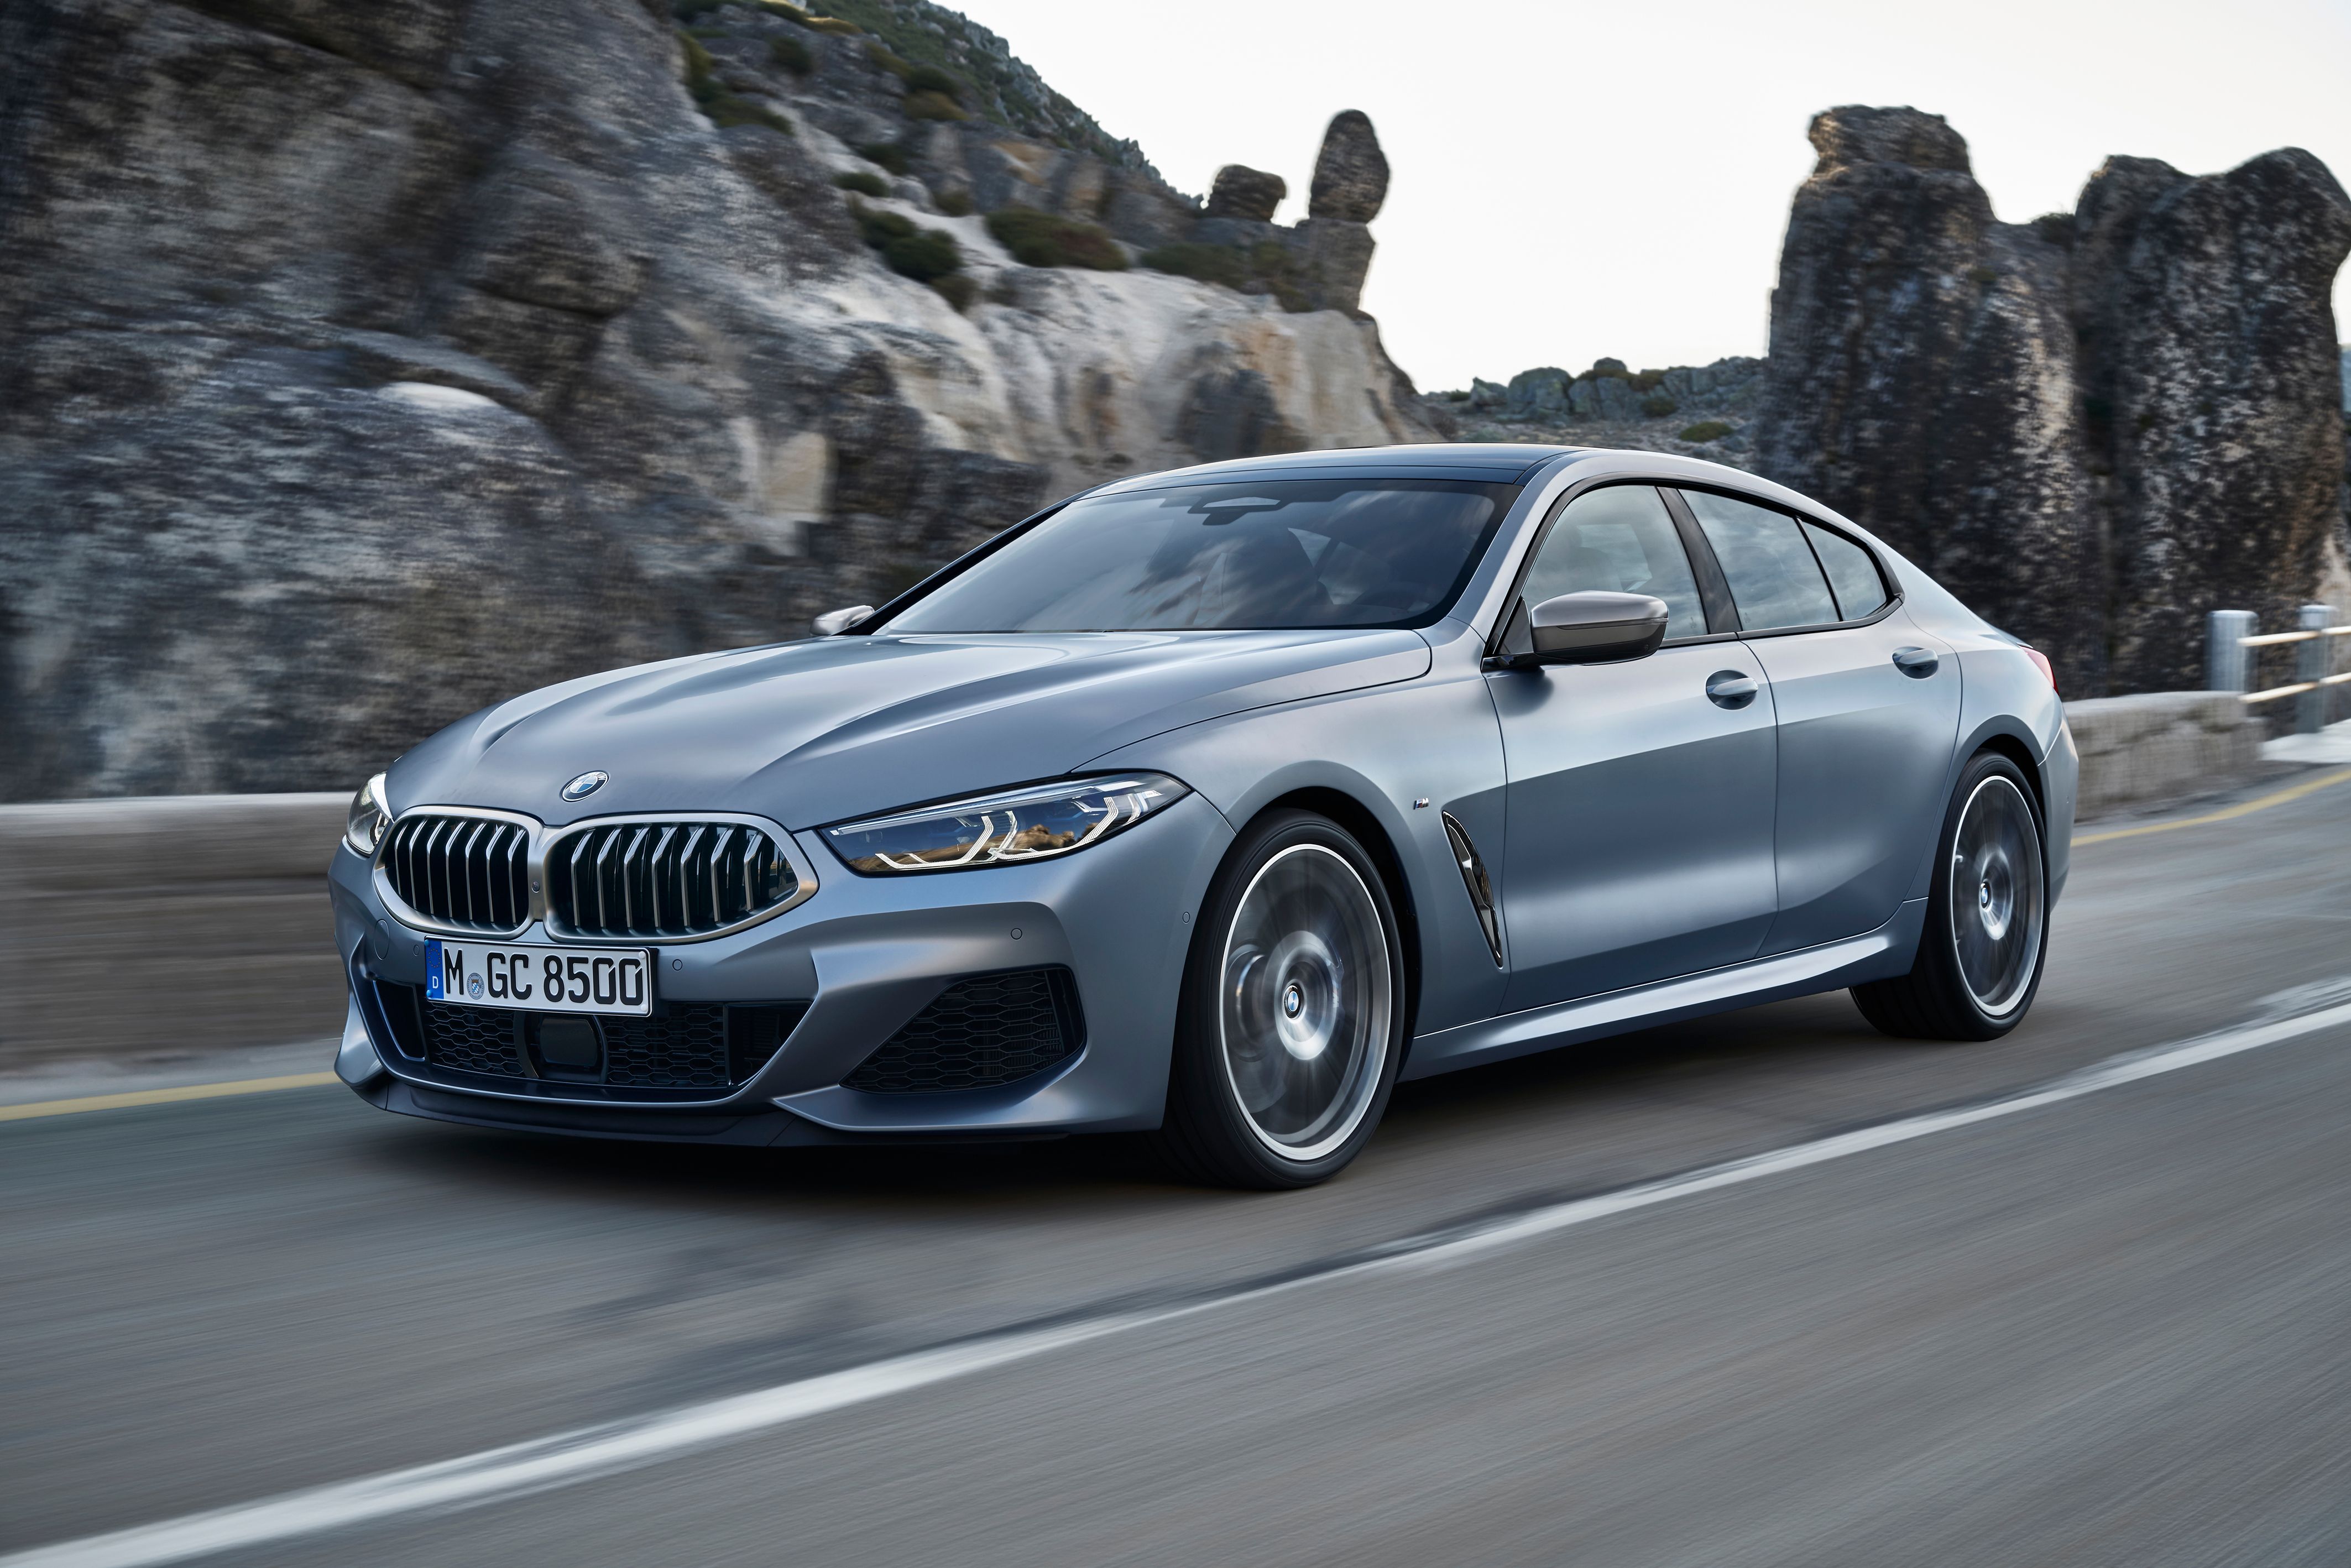 2020 BMW 8 Series Grows Bigger in Gran Coupe Trim, Goes After the Mercedes CLS